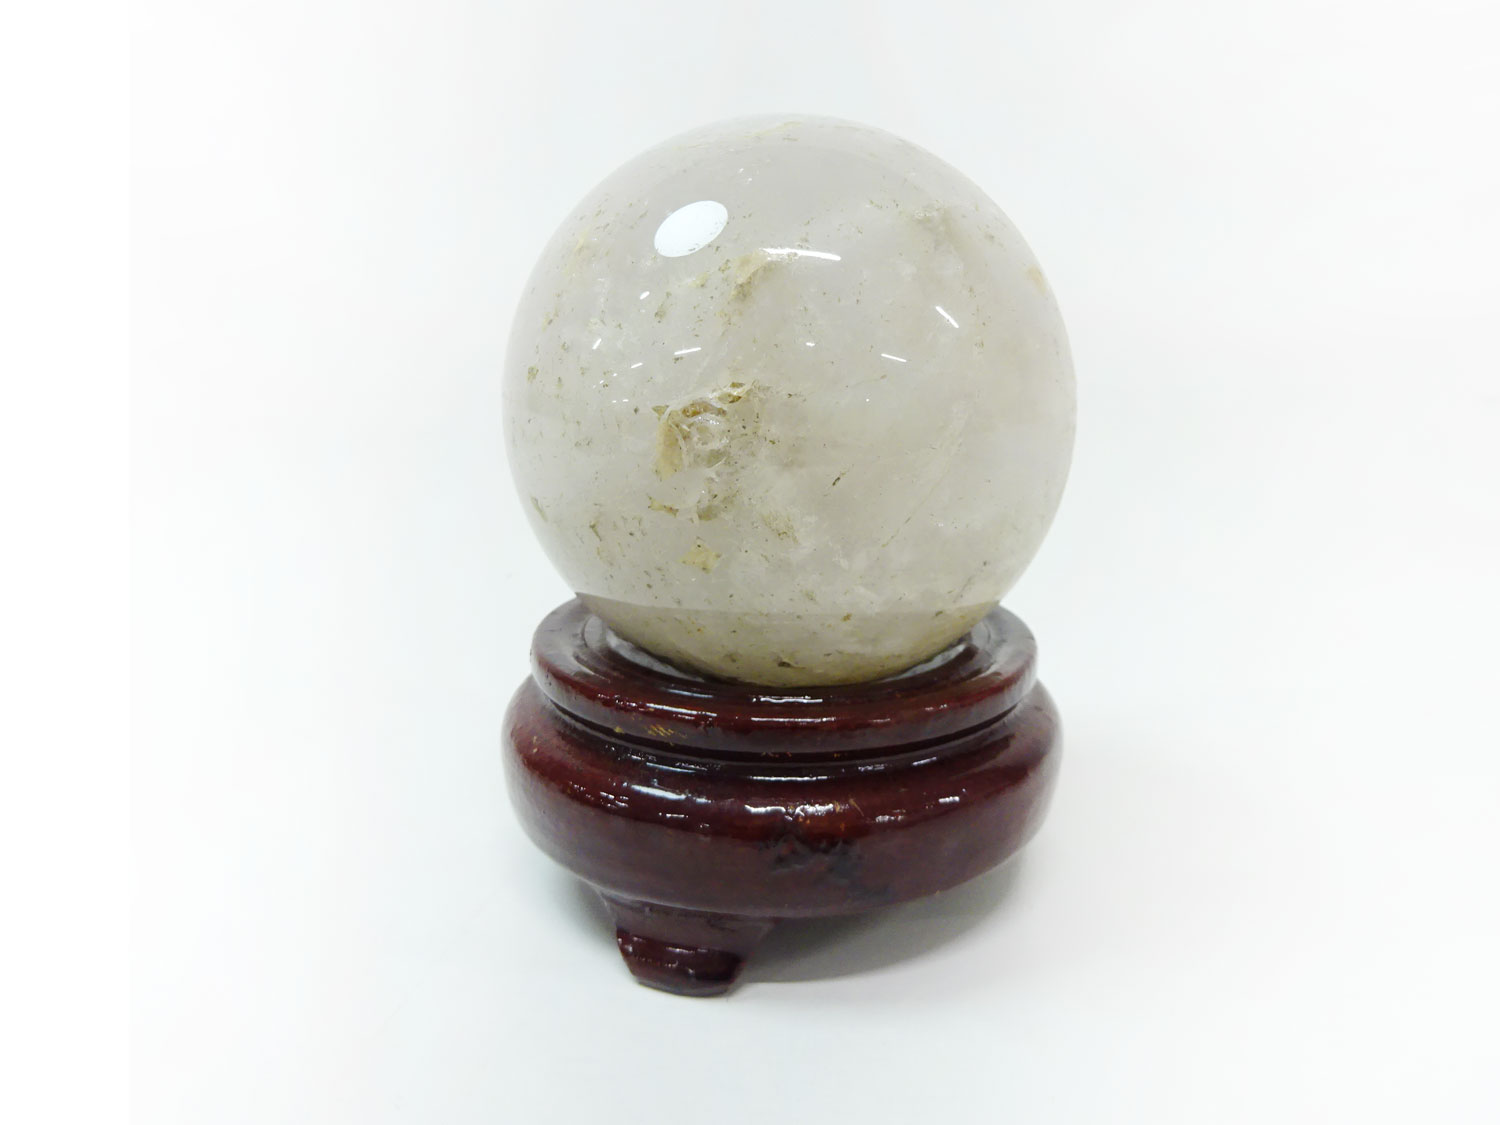 JAPANESE ORNAMENT / NATURAL CRYSTAL & MINERAL (stand not included) / HEALING CRYSTAL SPHERE